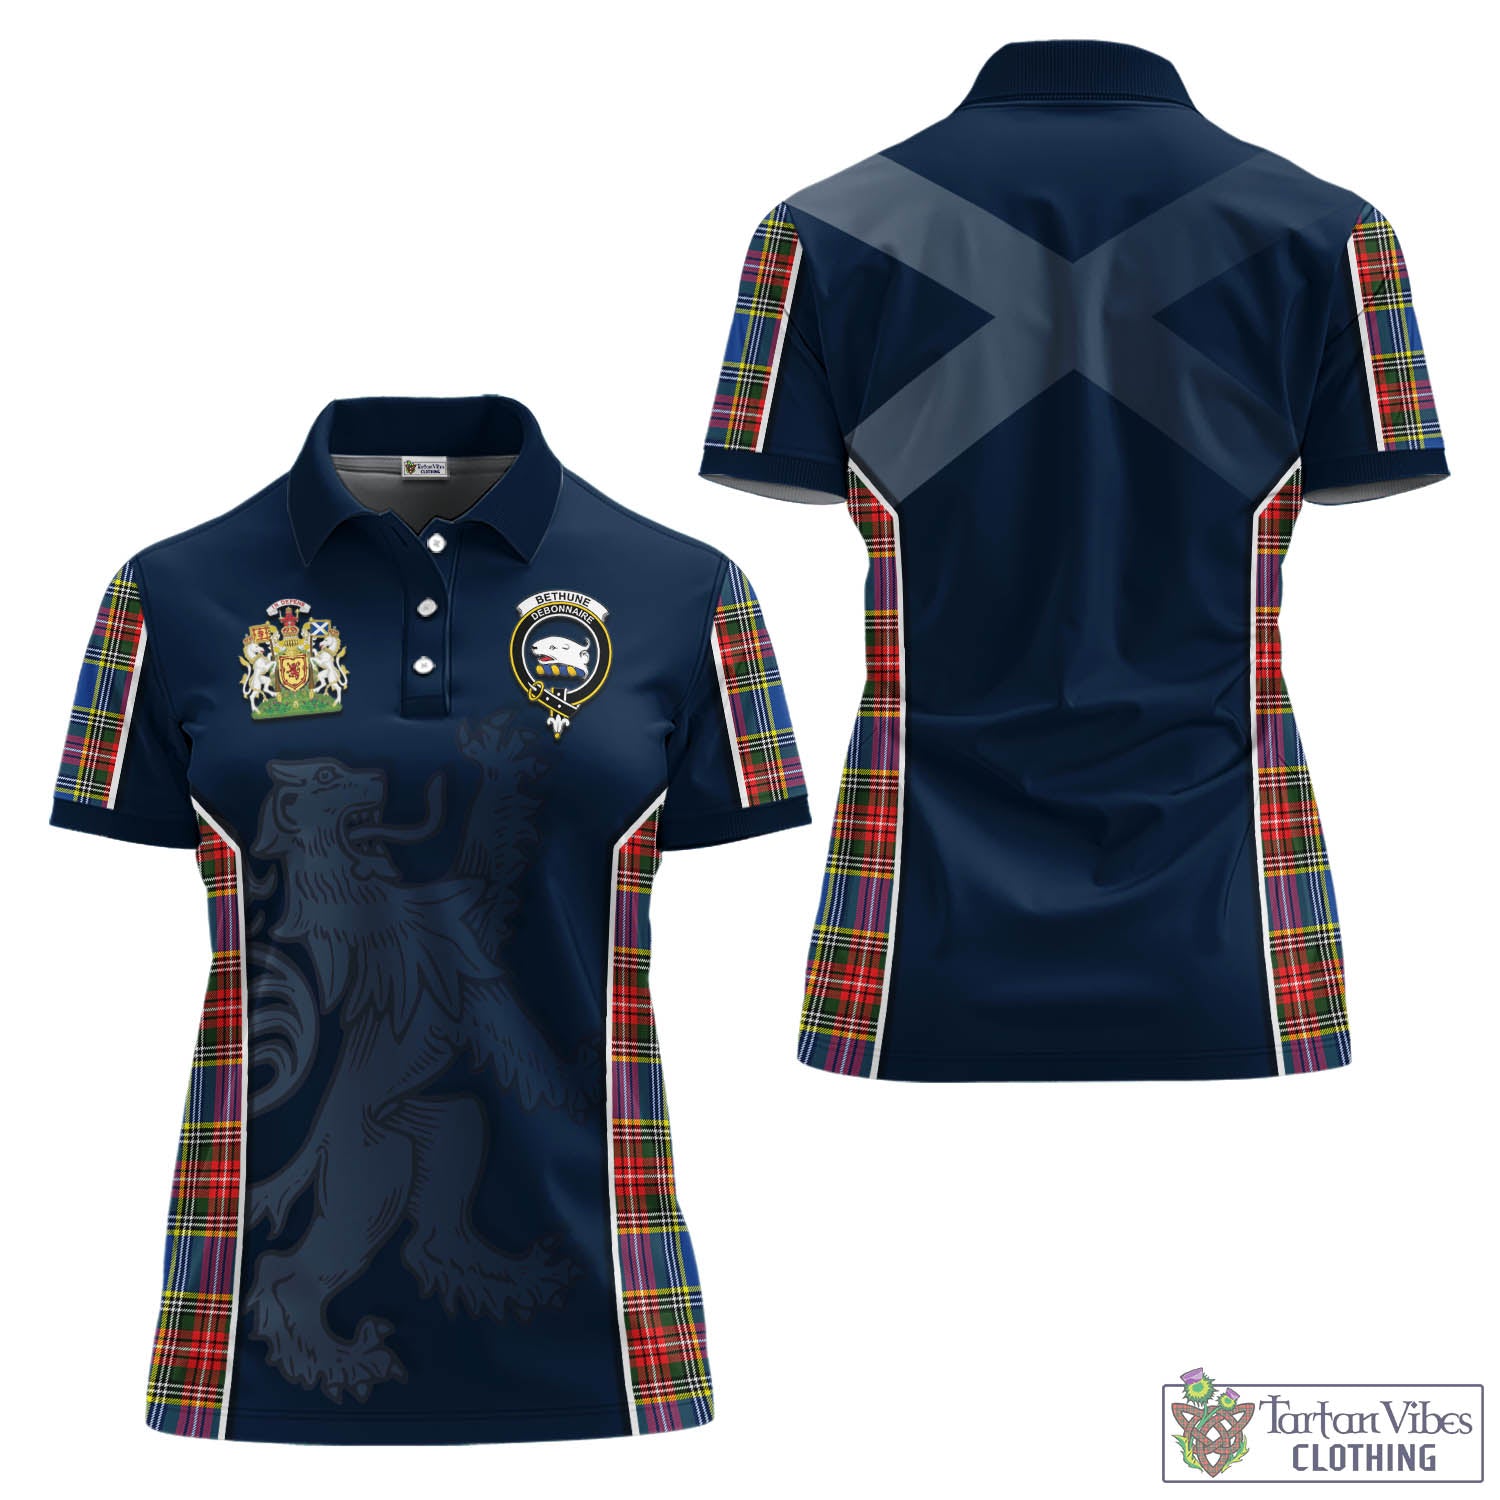 Tartan Vibes Clothing Bethune Tartan Women's Polo Shirt with Family Crest and Lion Rampant Vibes Sport Style